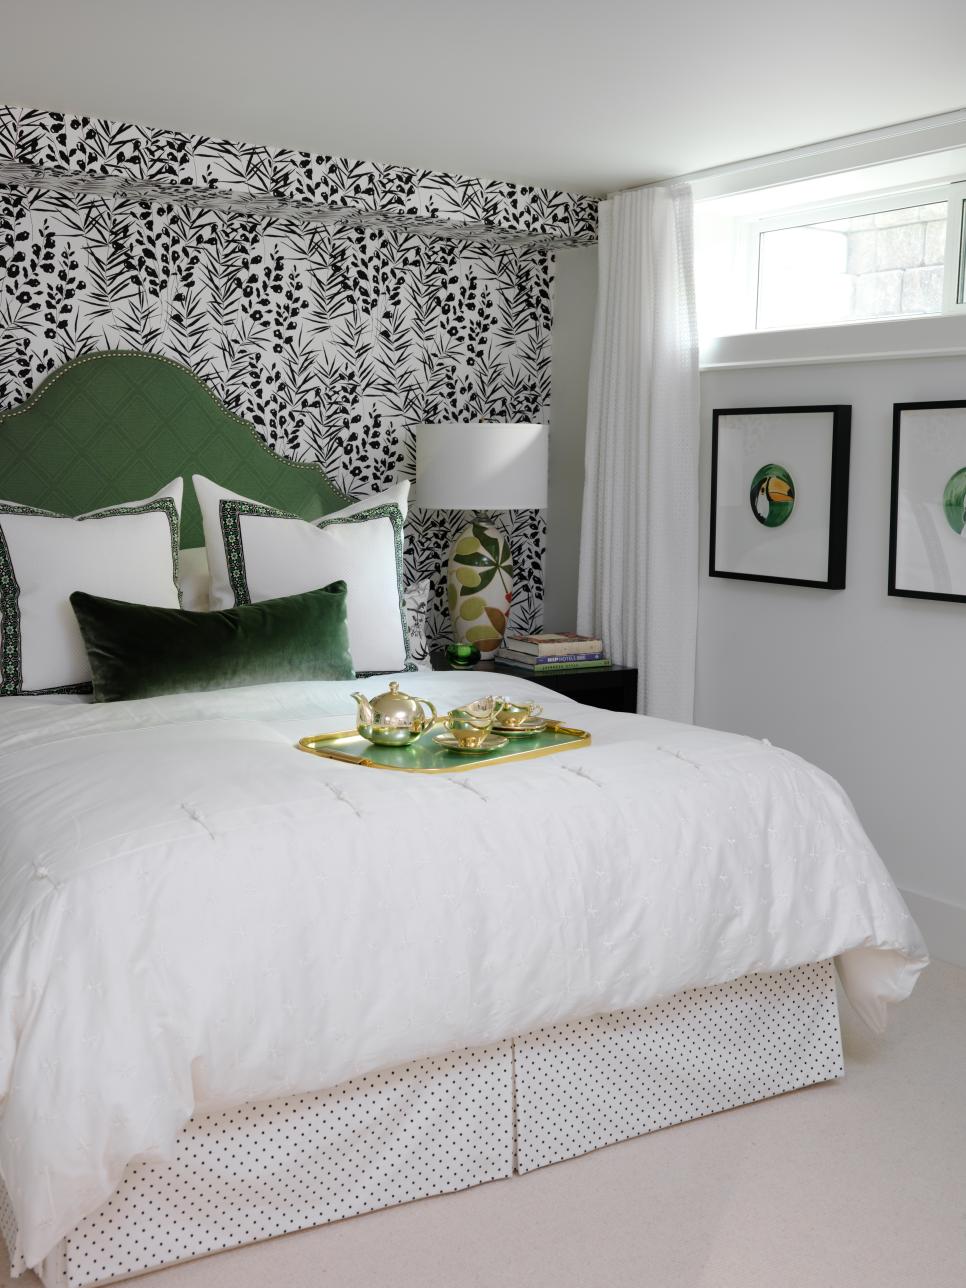 Asian Bedroom With Green Headboard and Patterned Wallpaper